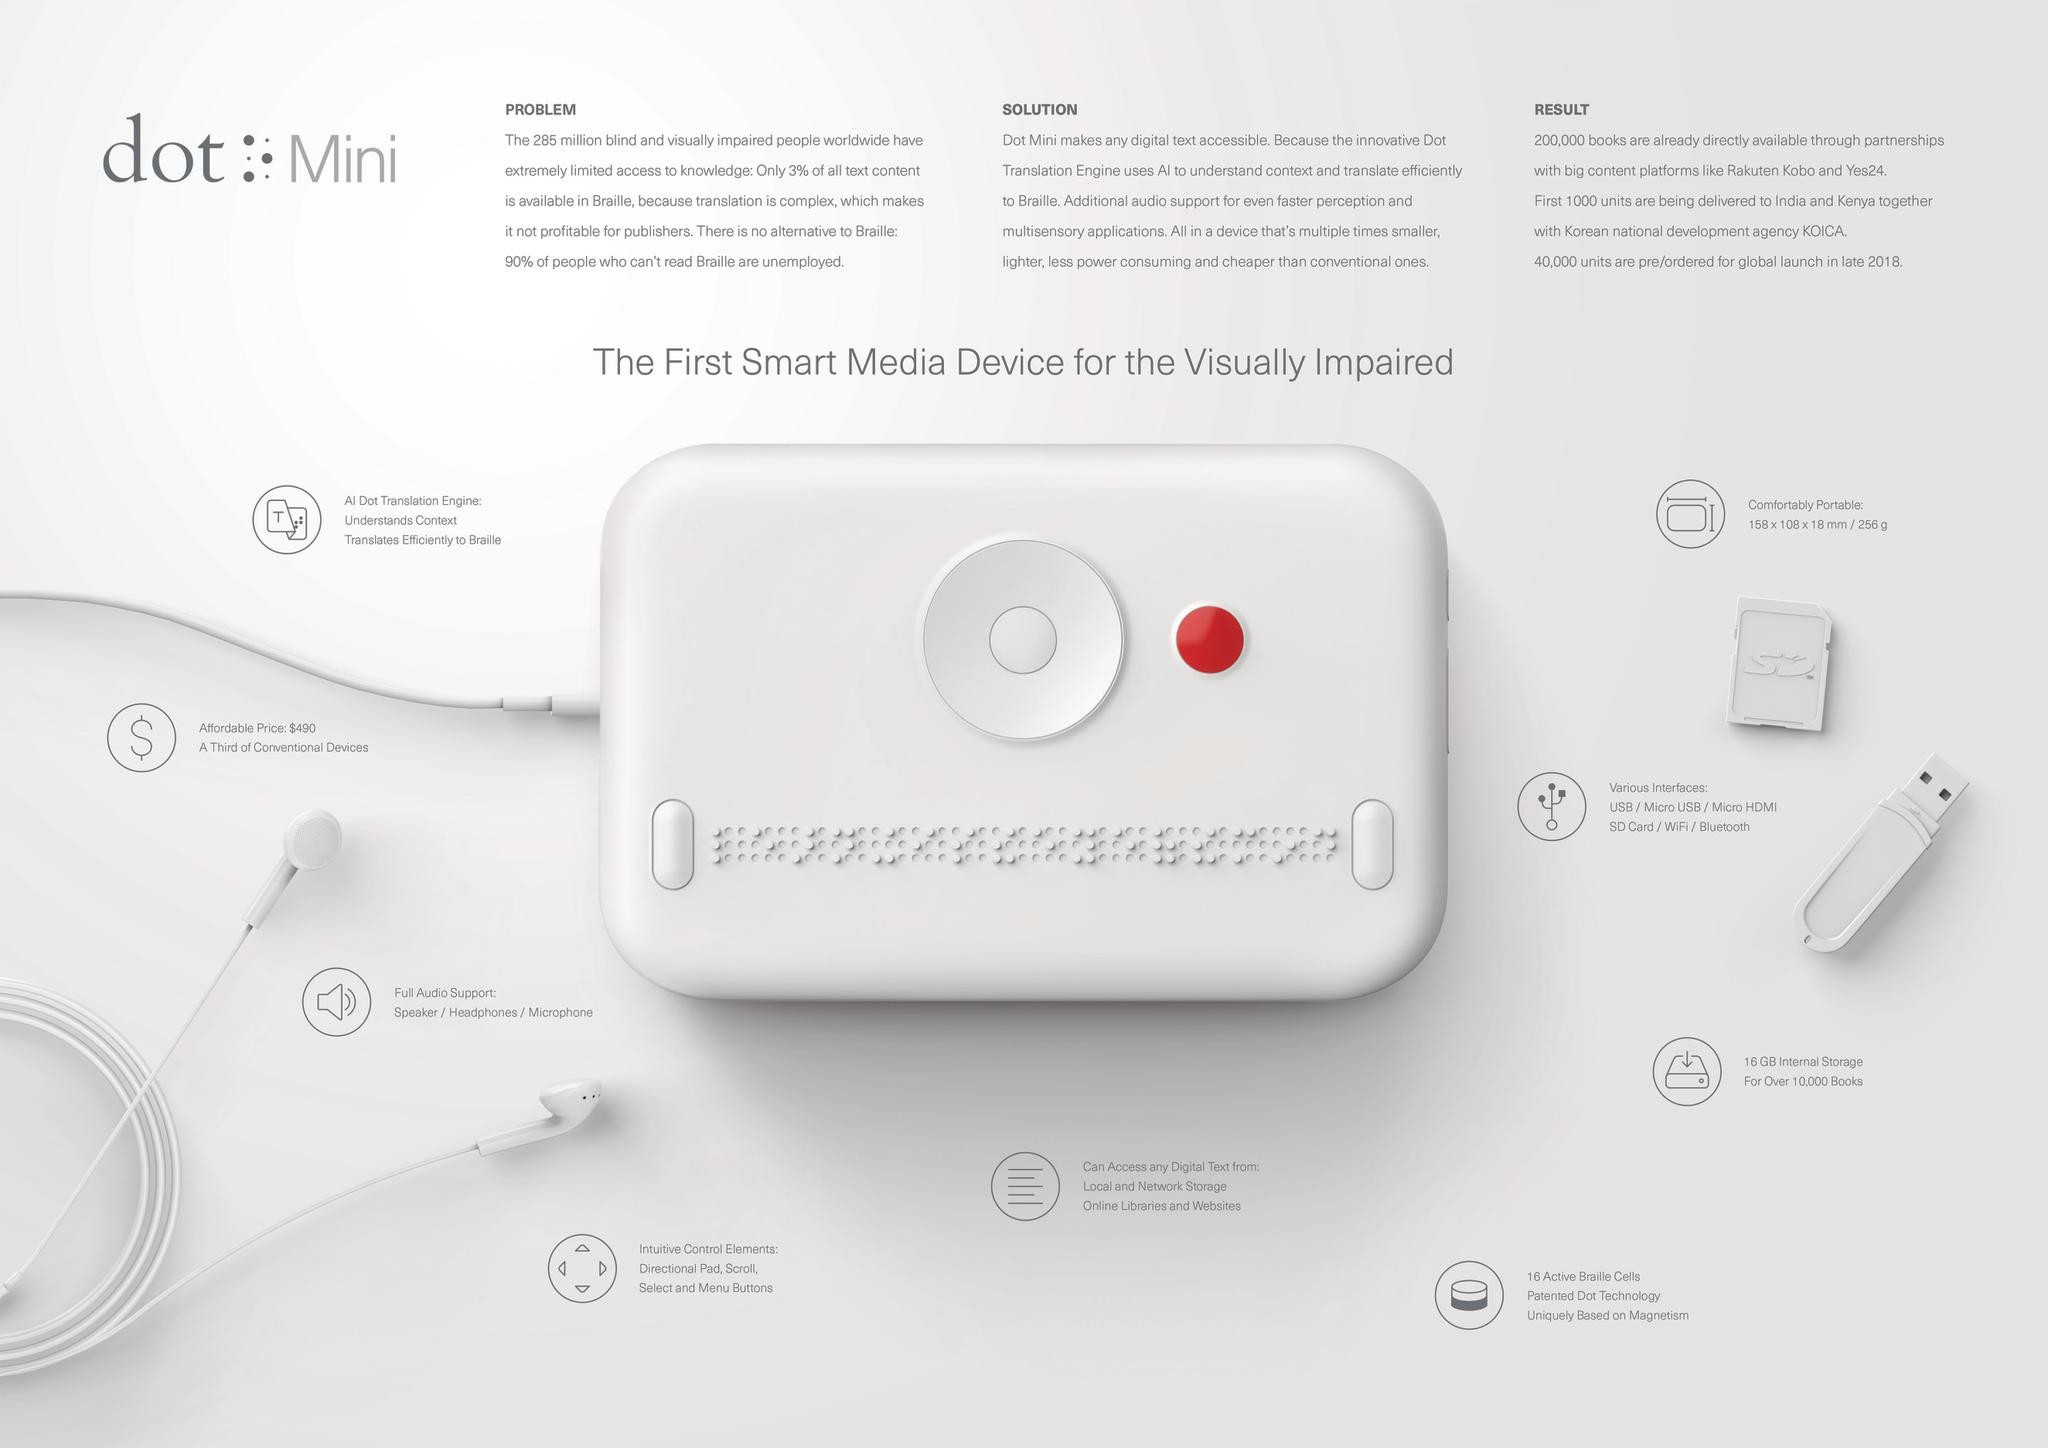 DOT MINI. THE FIRST SMART MEDIA DEVICE FOR THE VISUALLY IMPAIRED.